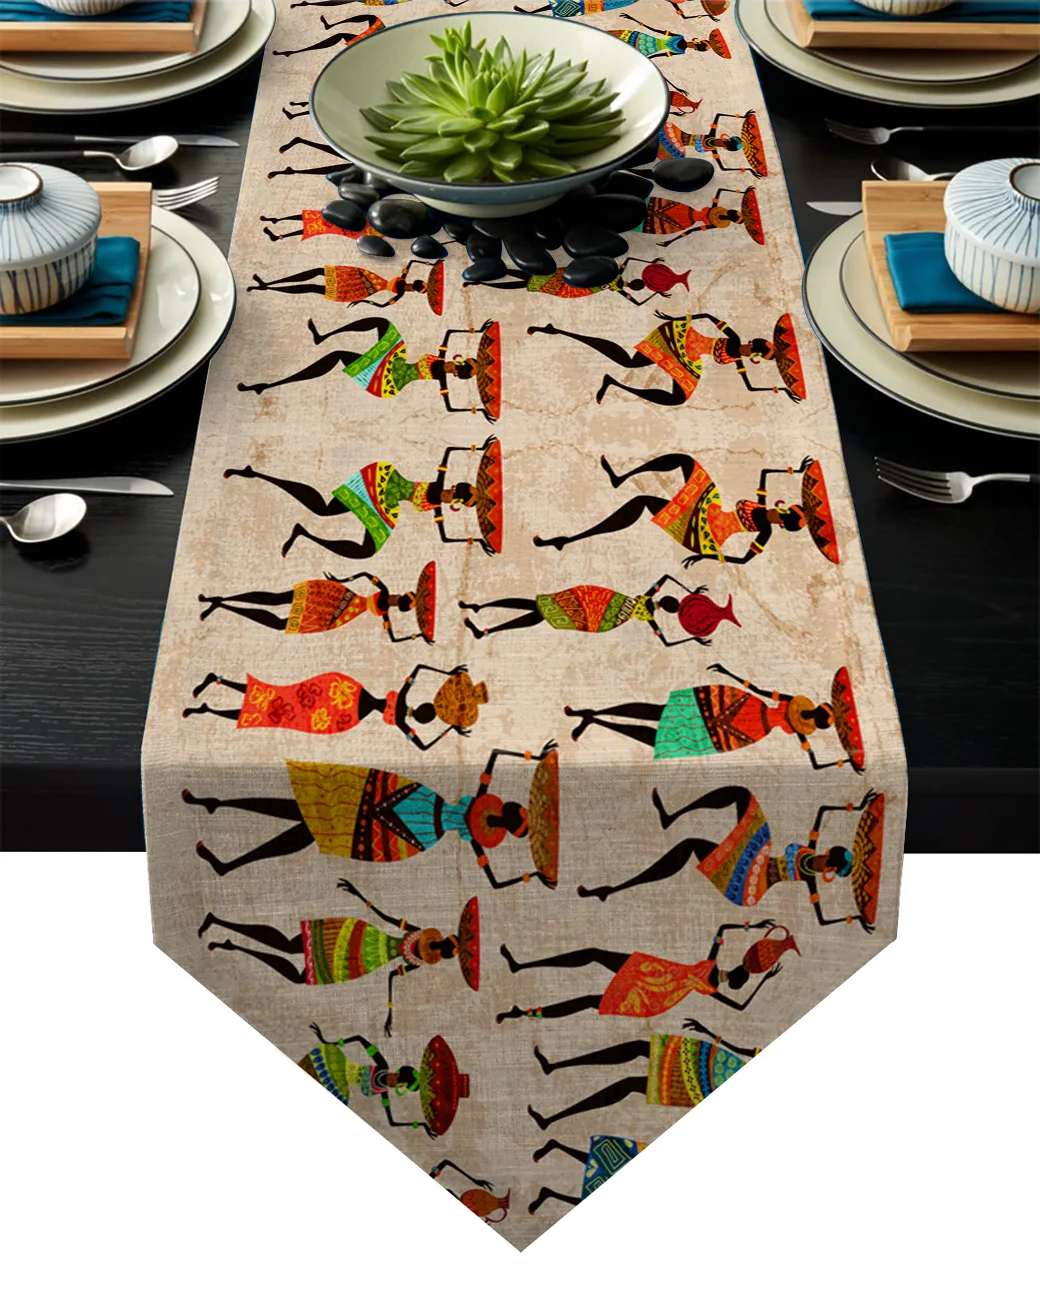 Ethnic African Women Table Runner Kitchen Decor Table Flag Tablecloth Placemat Hotel Home Festival Decoration Table Runners